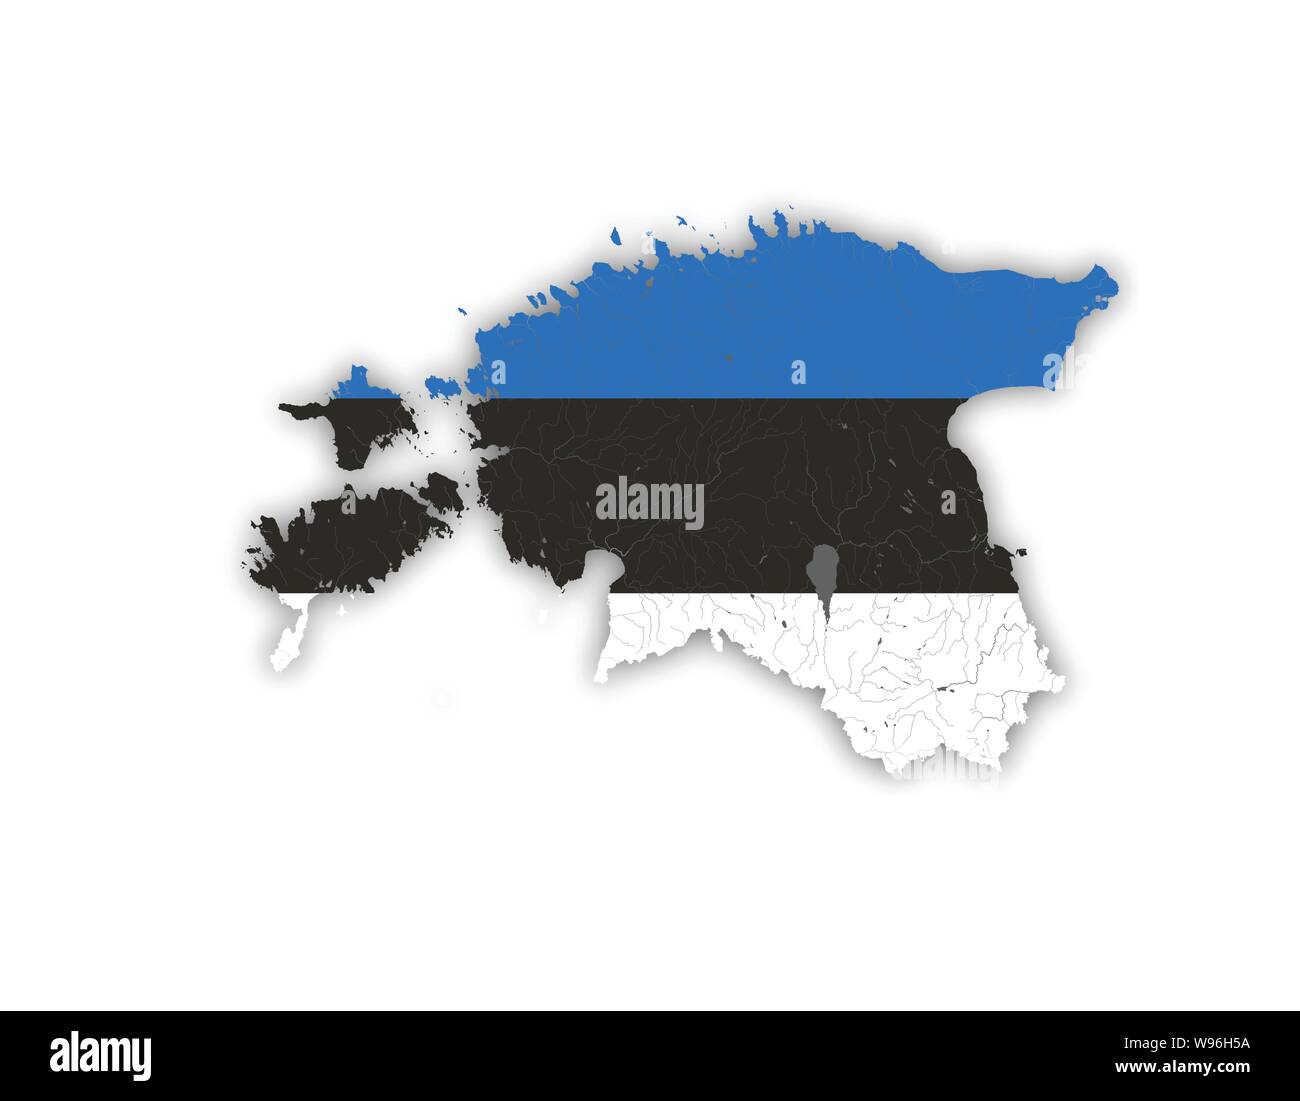 Map of Estonia with rivers and lakes in colors of the Estonian national flag. Please look at my other images of cartographic series - they are all ver Stock Vector